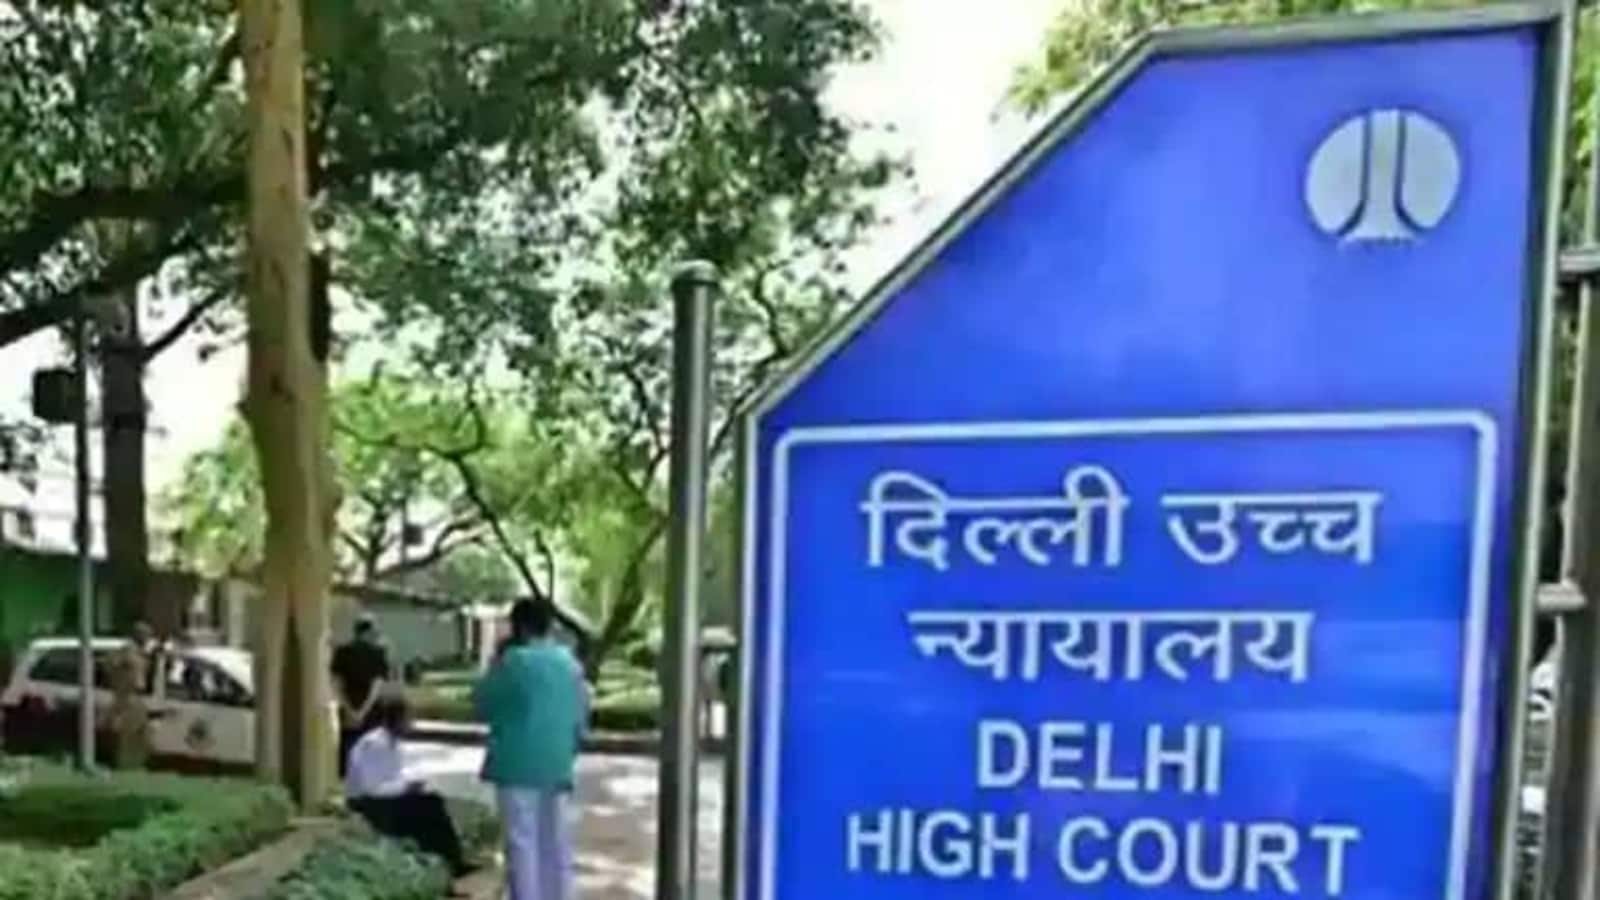 Delhi High Court Denies Parole Request for Convict Seeking Conjugal Relationship with Live-in Partner